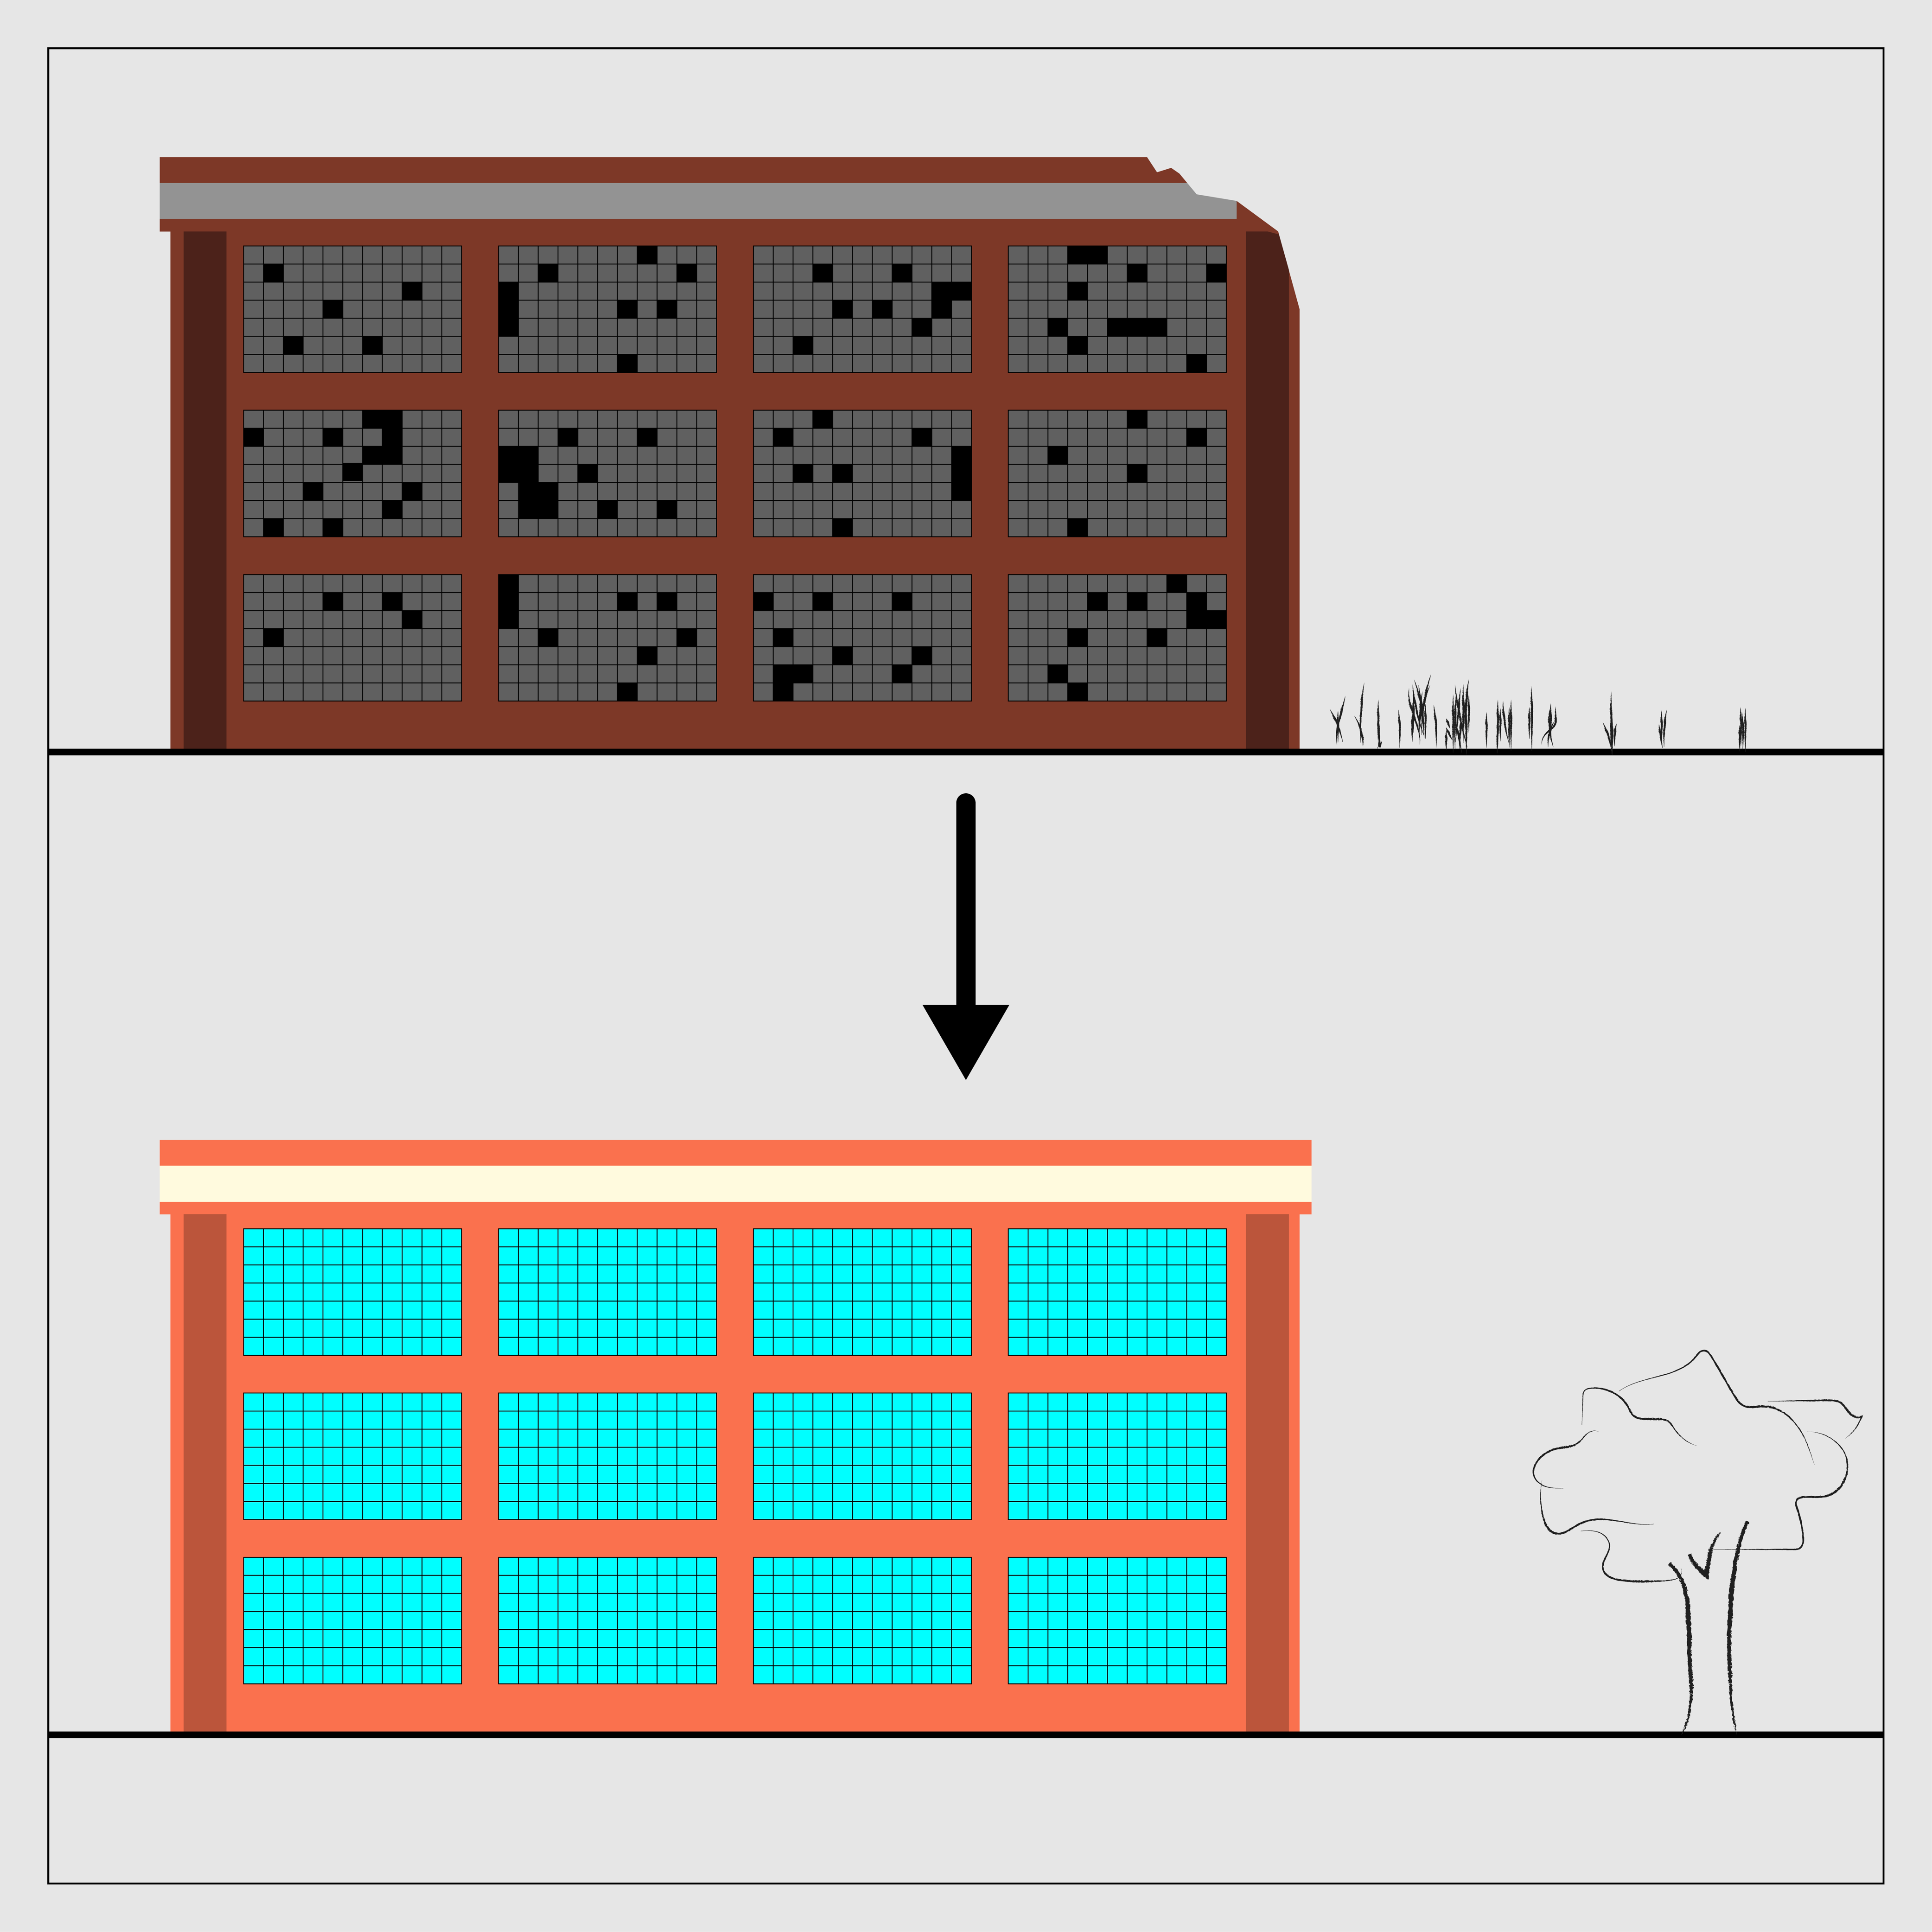 A diagram showing two versions of the same building. At the top: a darkened mill-style building with missing windows, a broken roof, and sparse plant growth around it. An arrow points to an image below where the image has been brightened, the windows replaced, the roof repaired, and a tree growing next the structure.